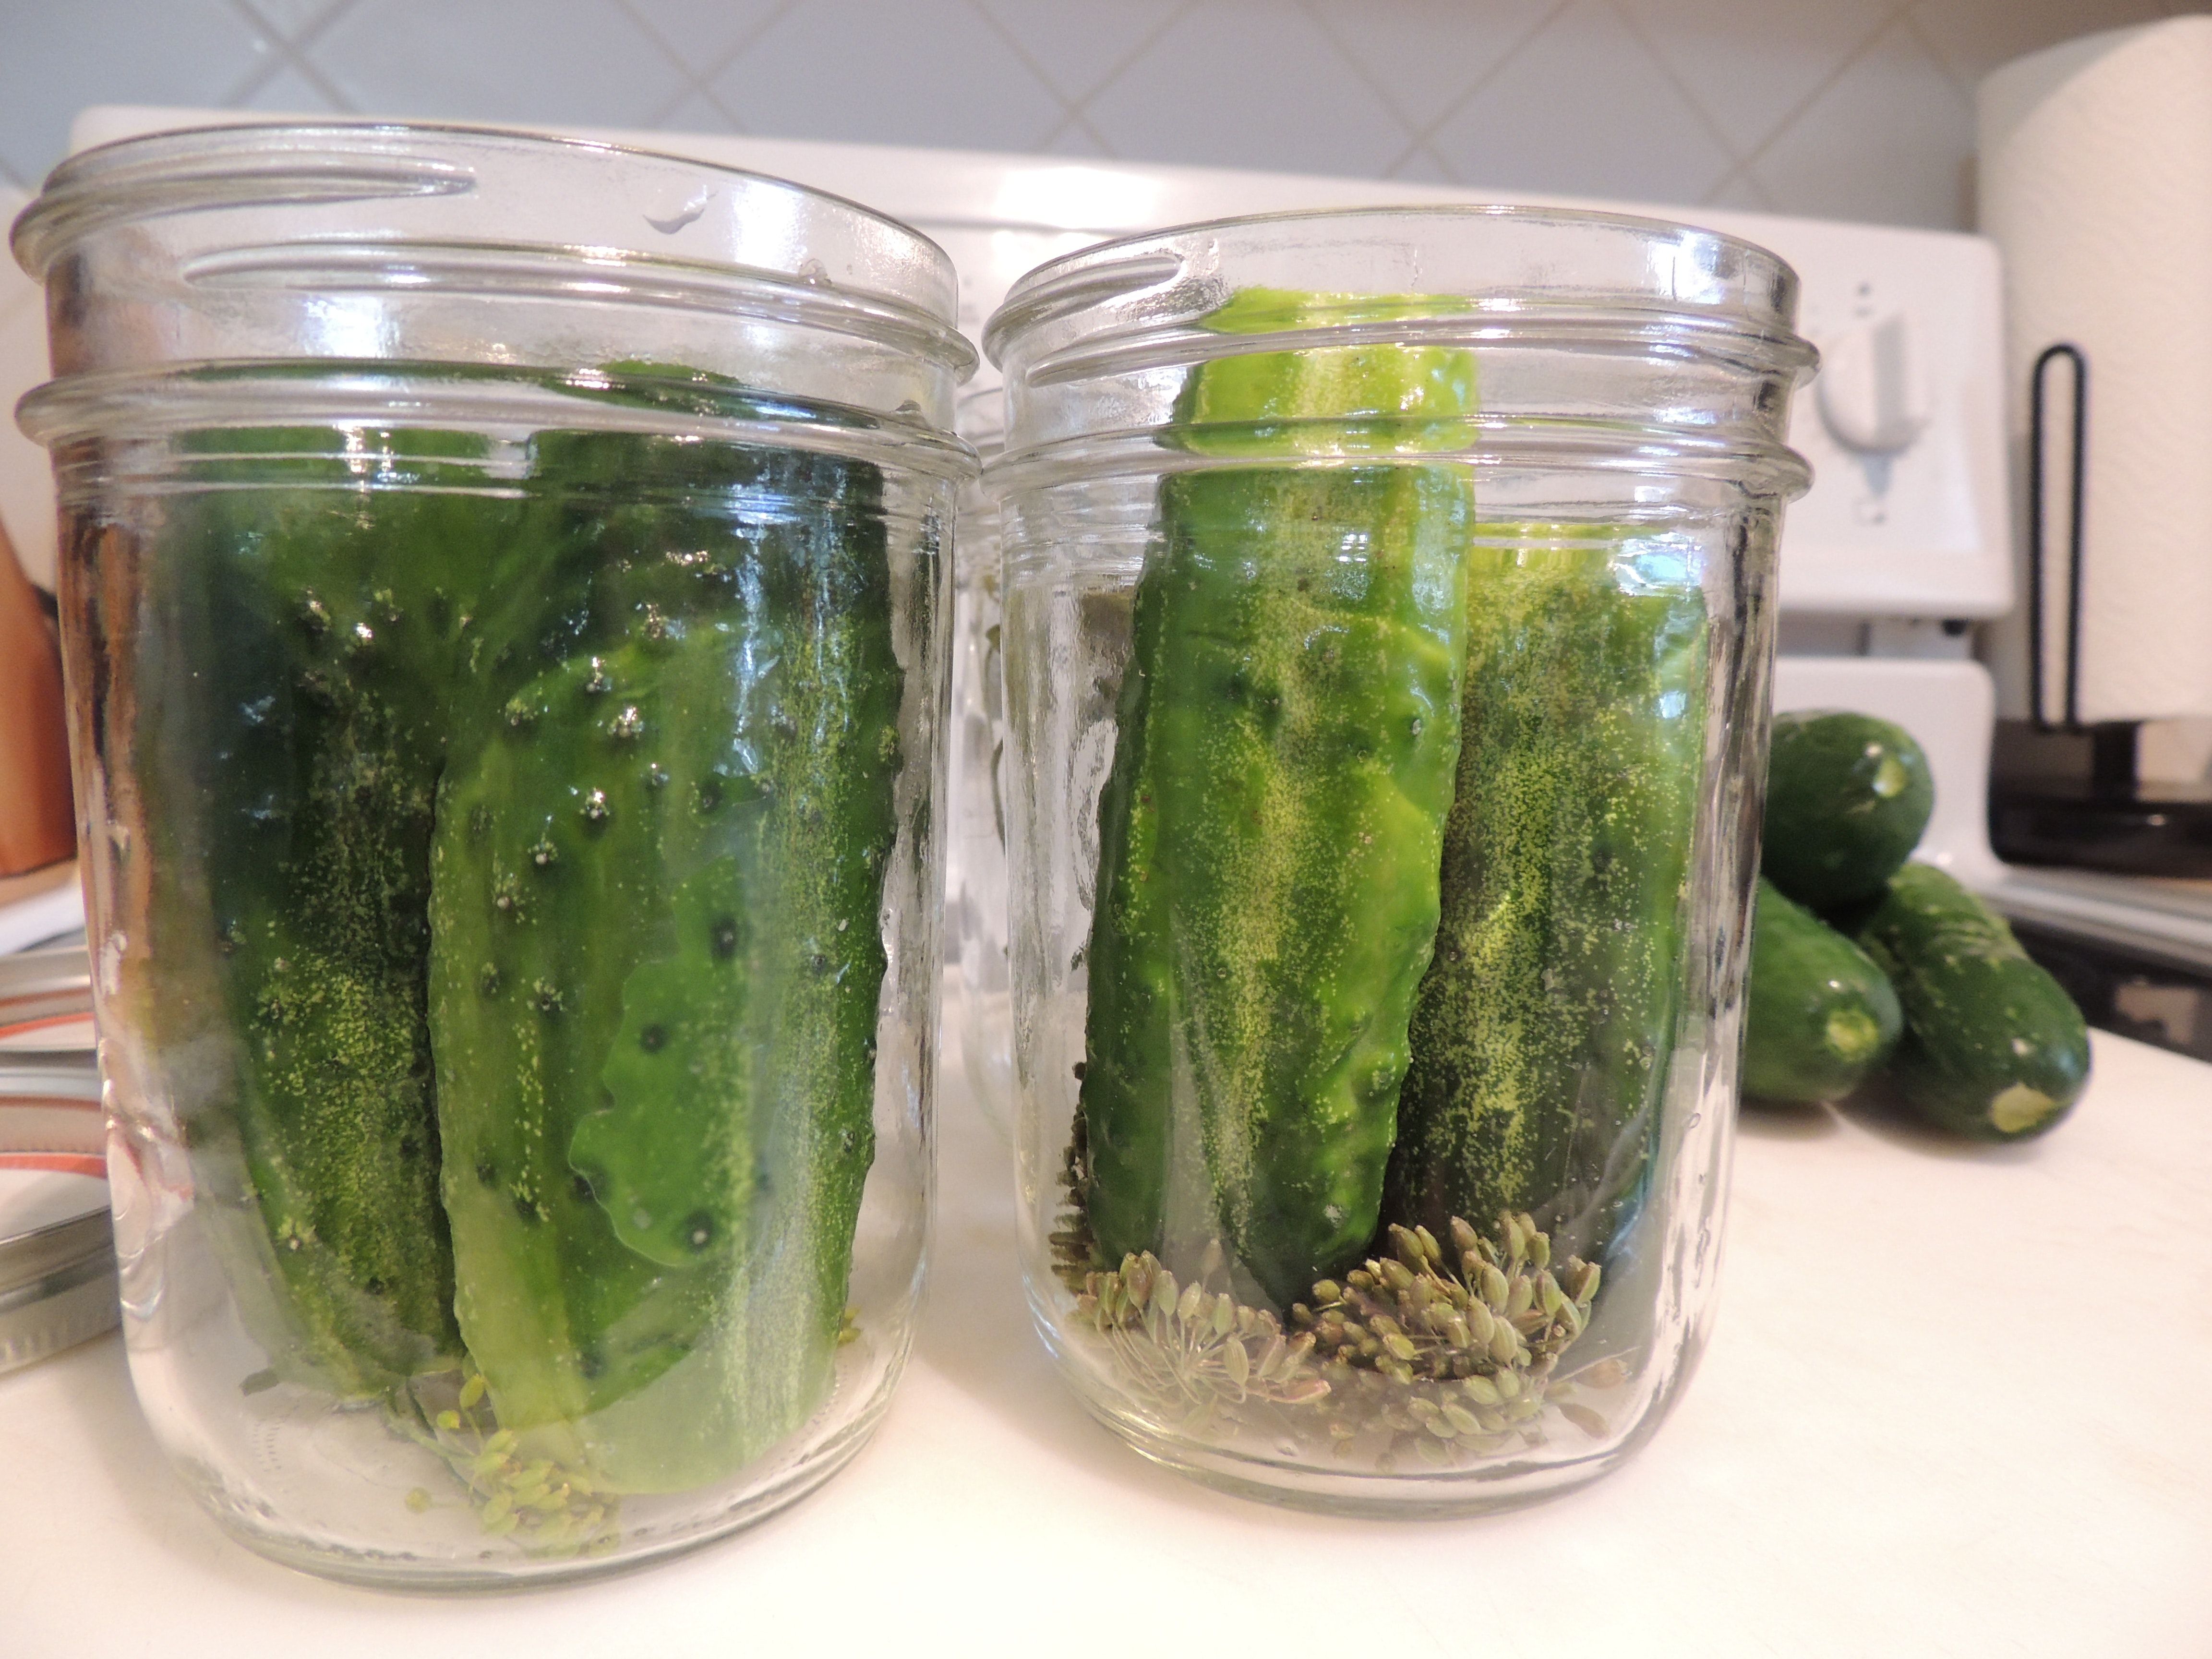 Free of canning jars, cucumbers, dill